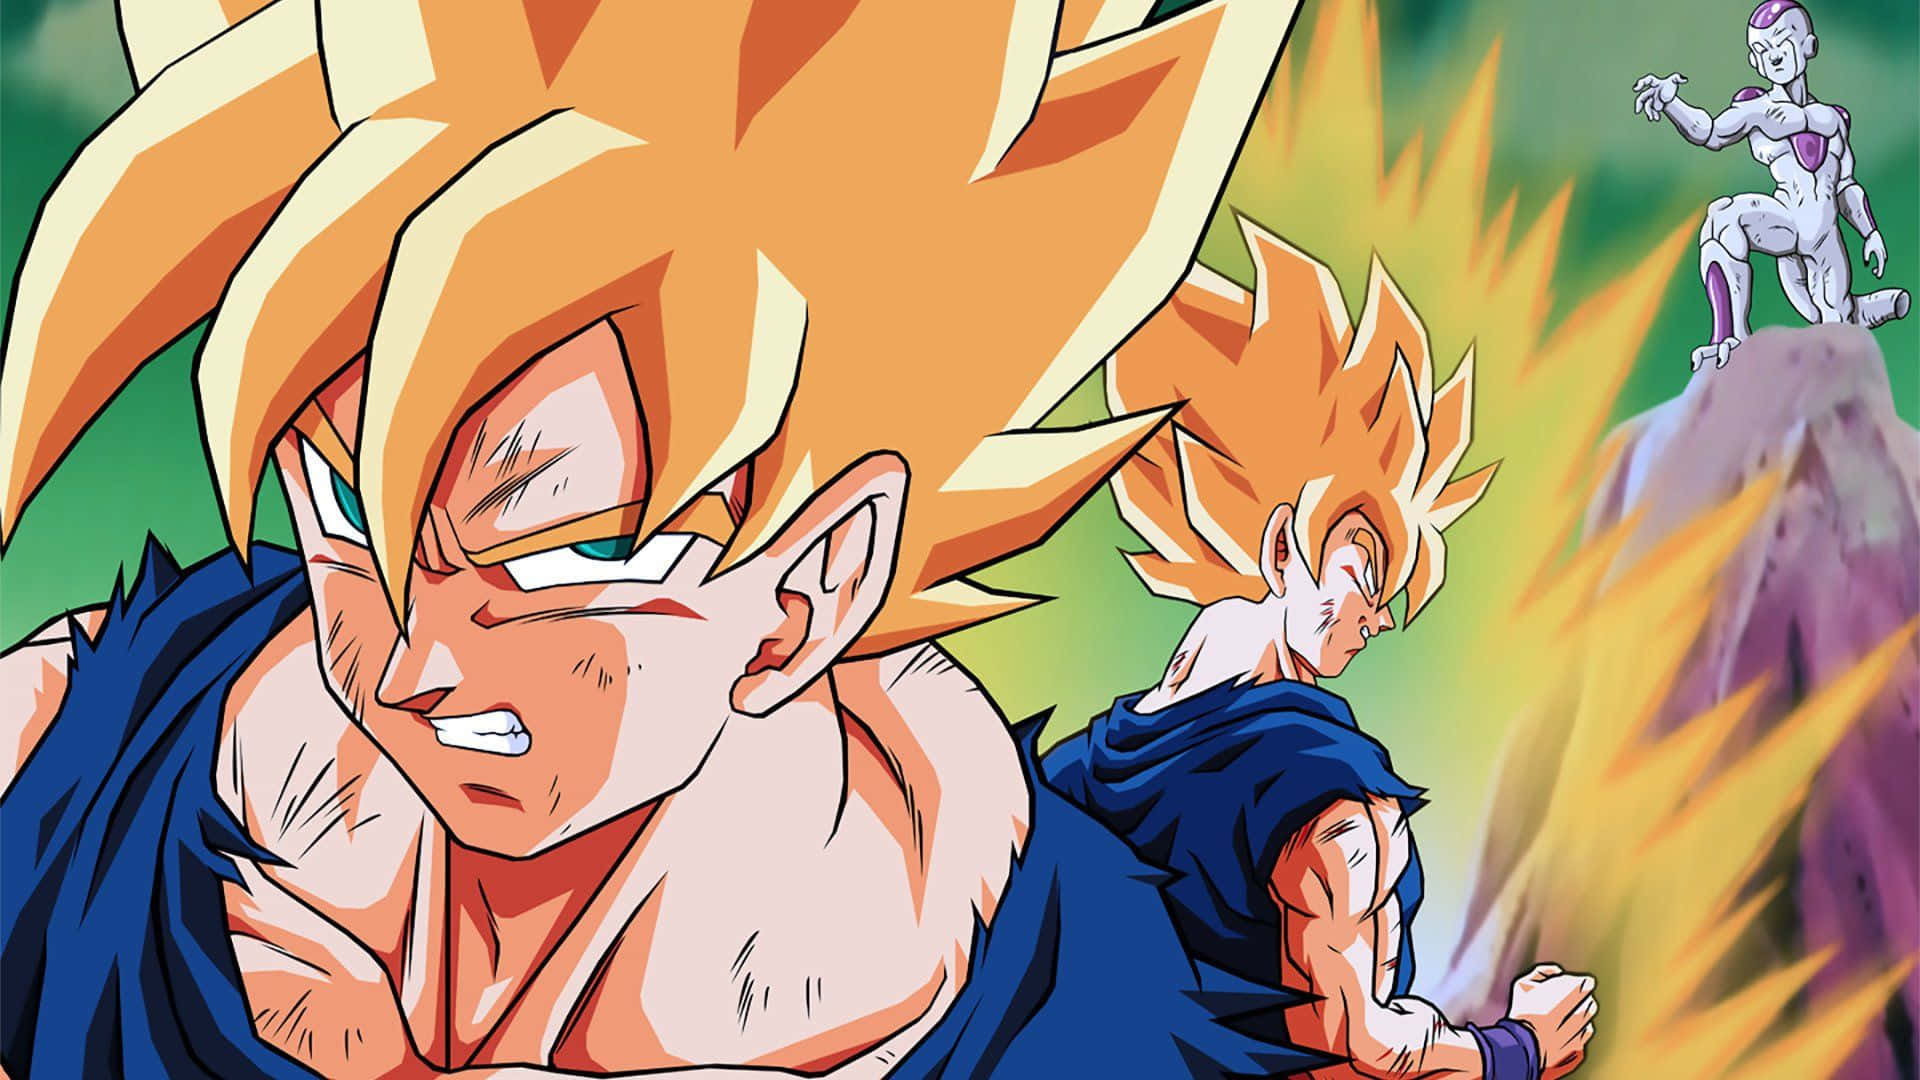 Dragon Ball Z fans will love this action packed wall paper!